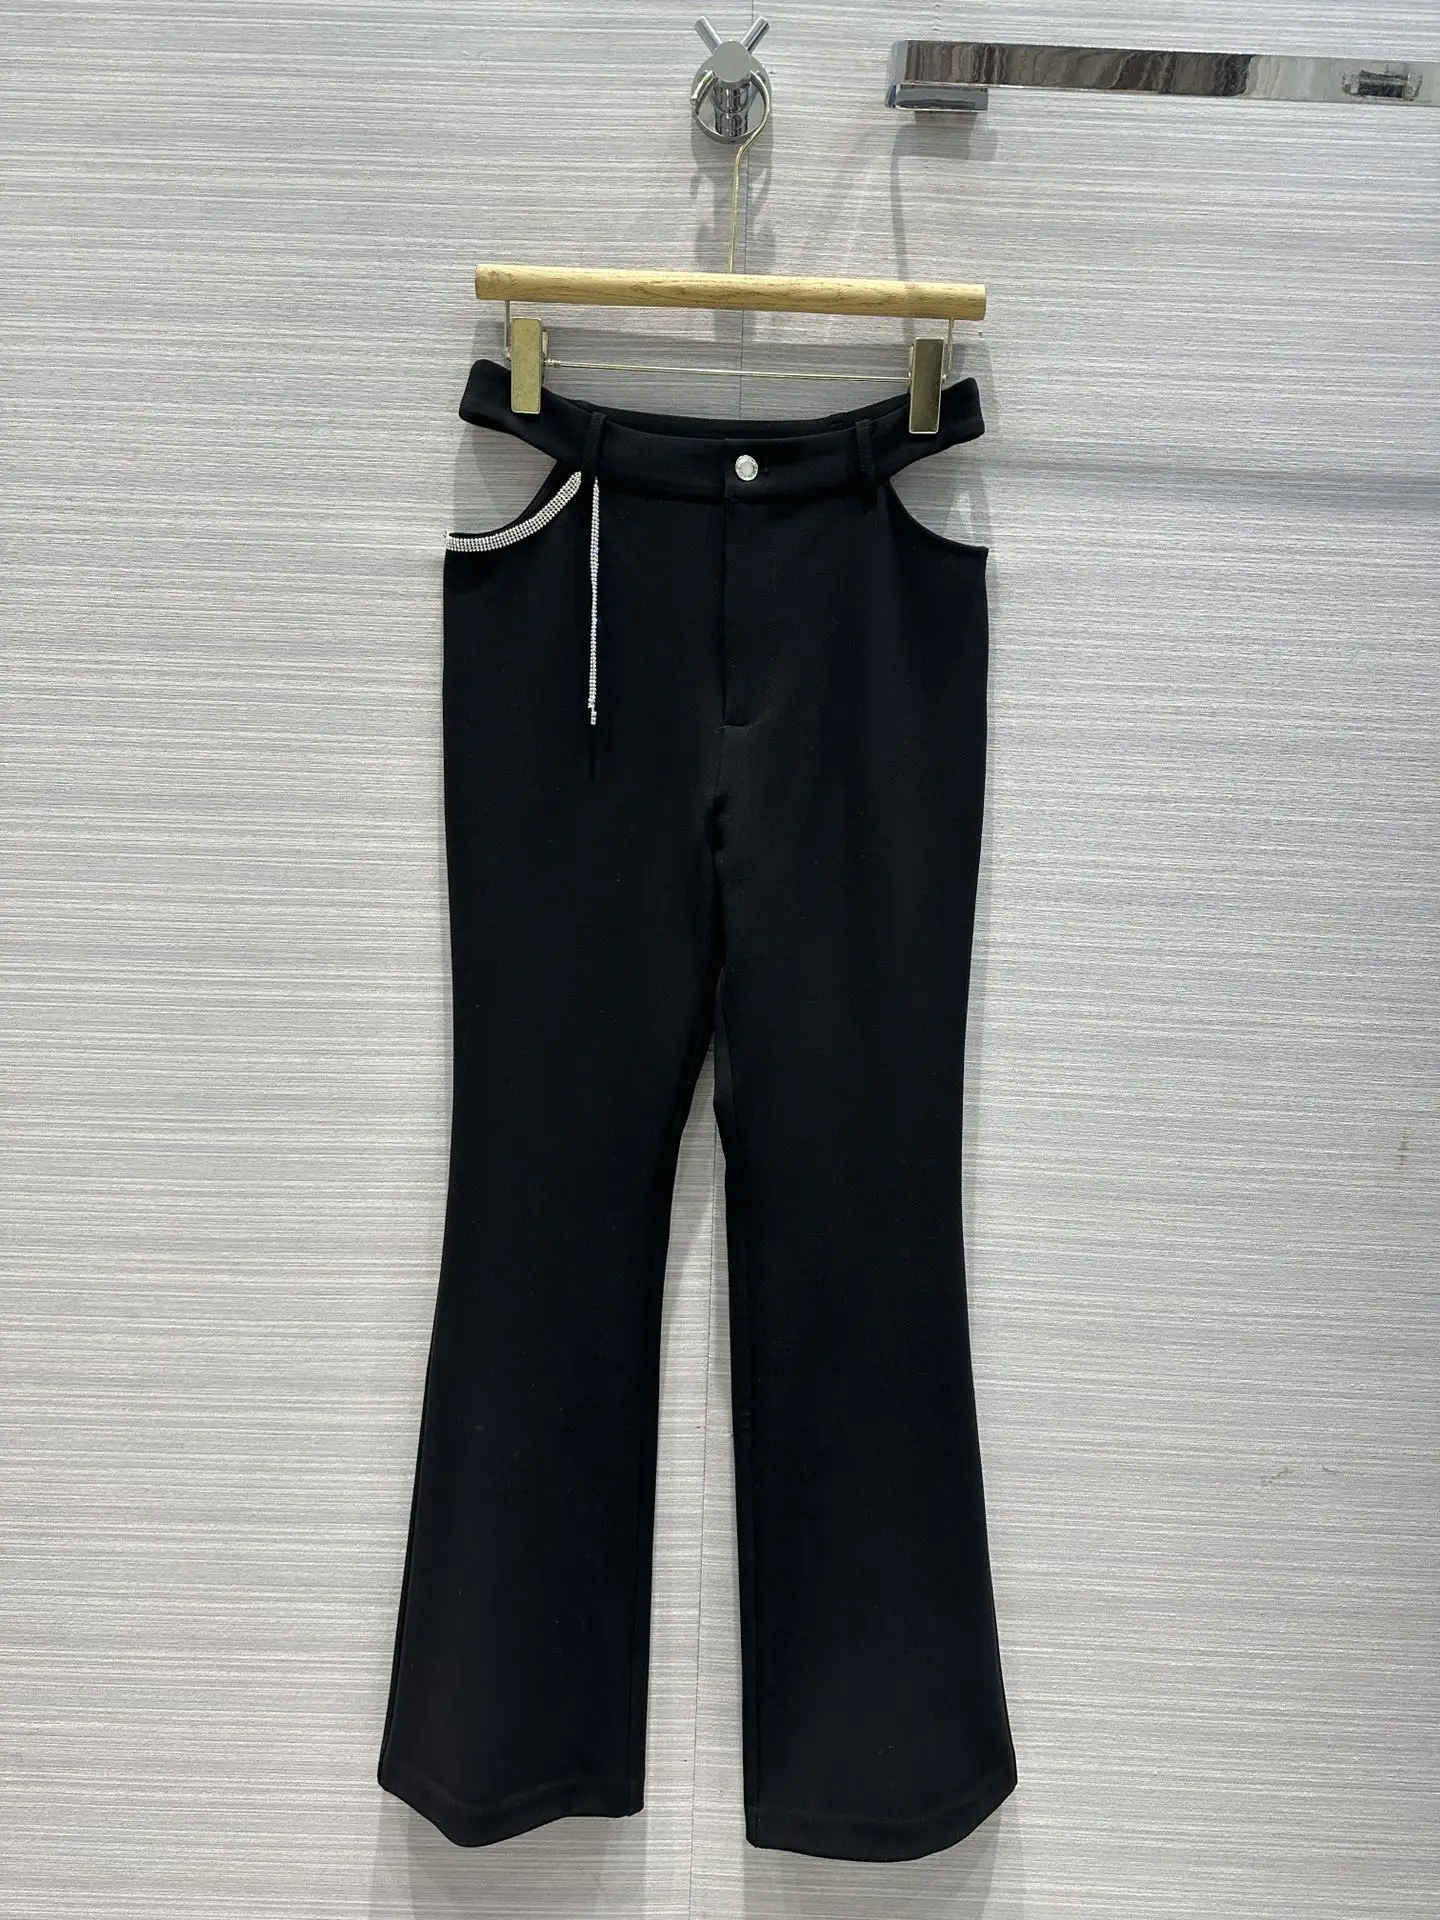 2023 spring and summer women's clothing fashion new Hollow Midriff Outfit Chain Suit Pants 0413